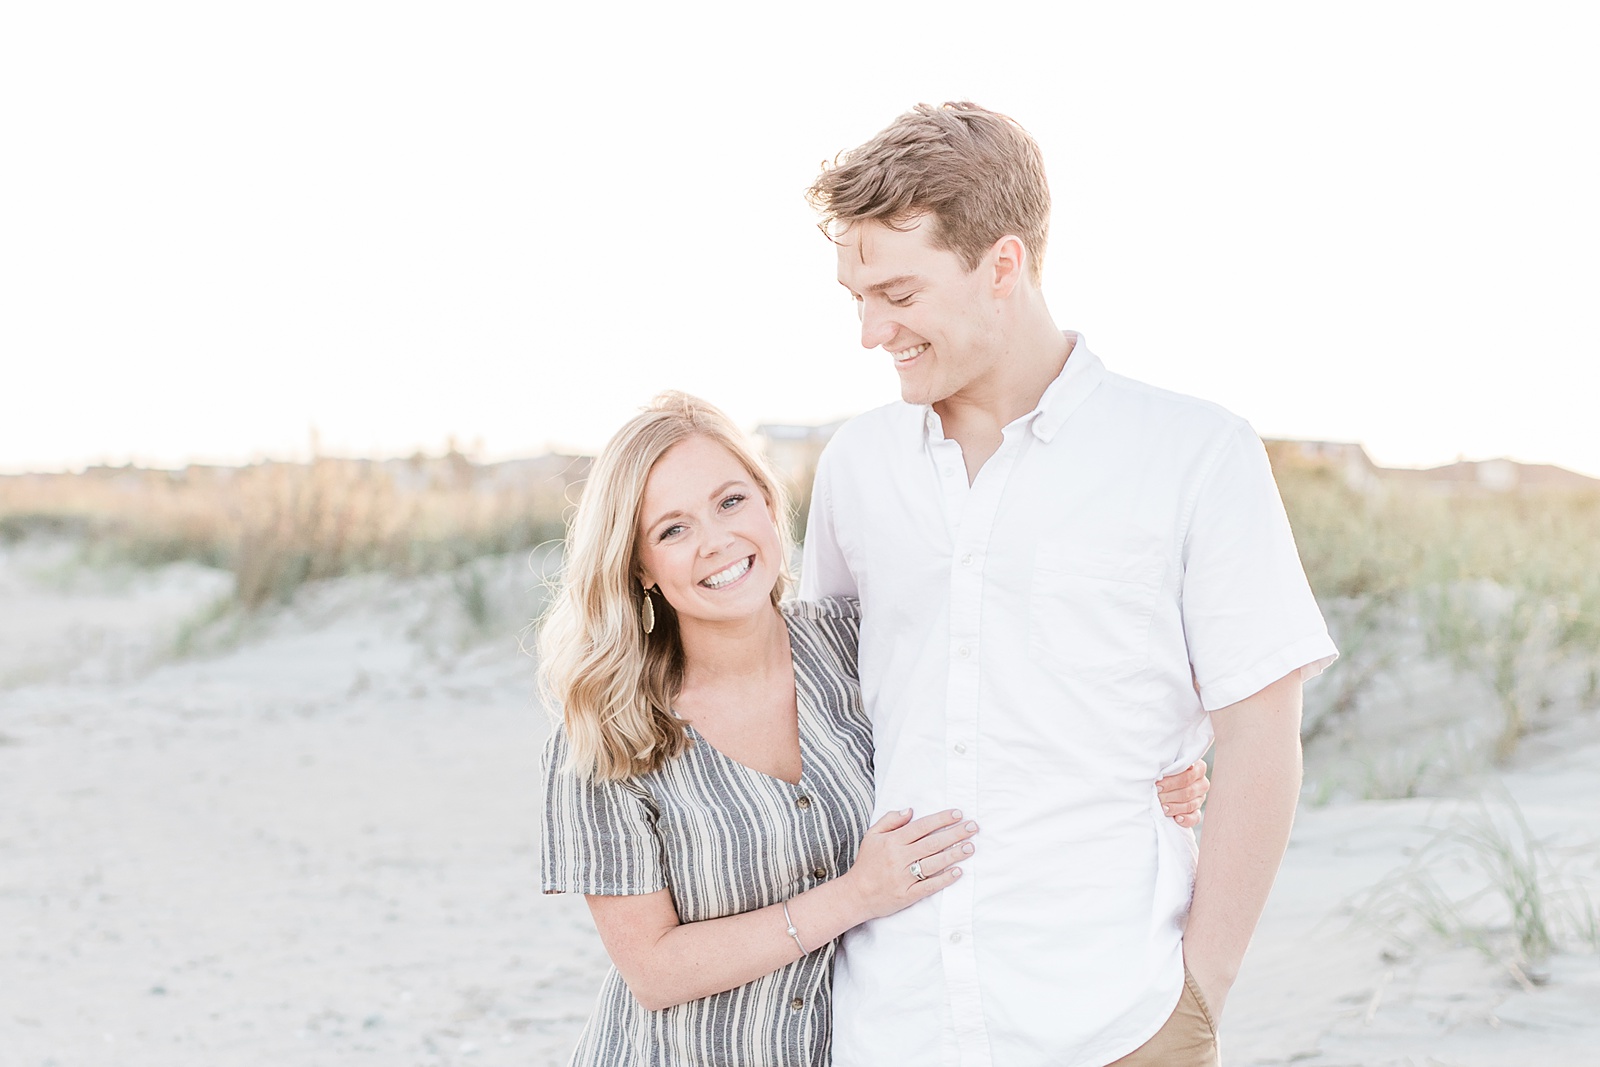 What to wear for your family session on the beach | Caitlyn Motycka Photography